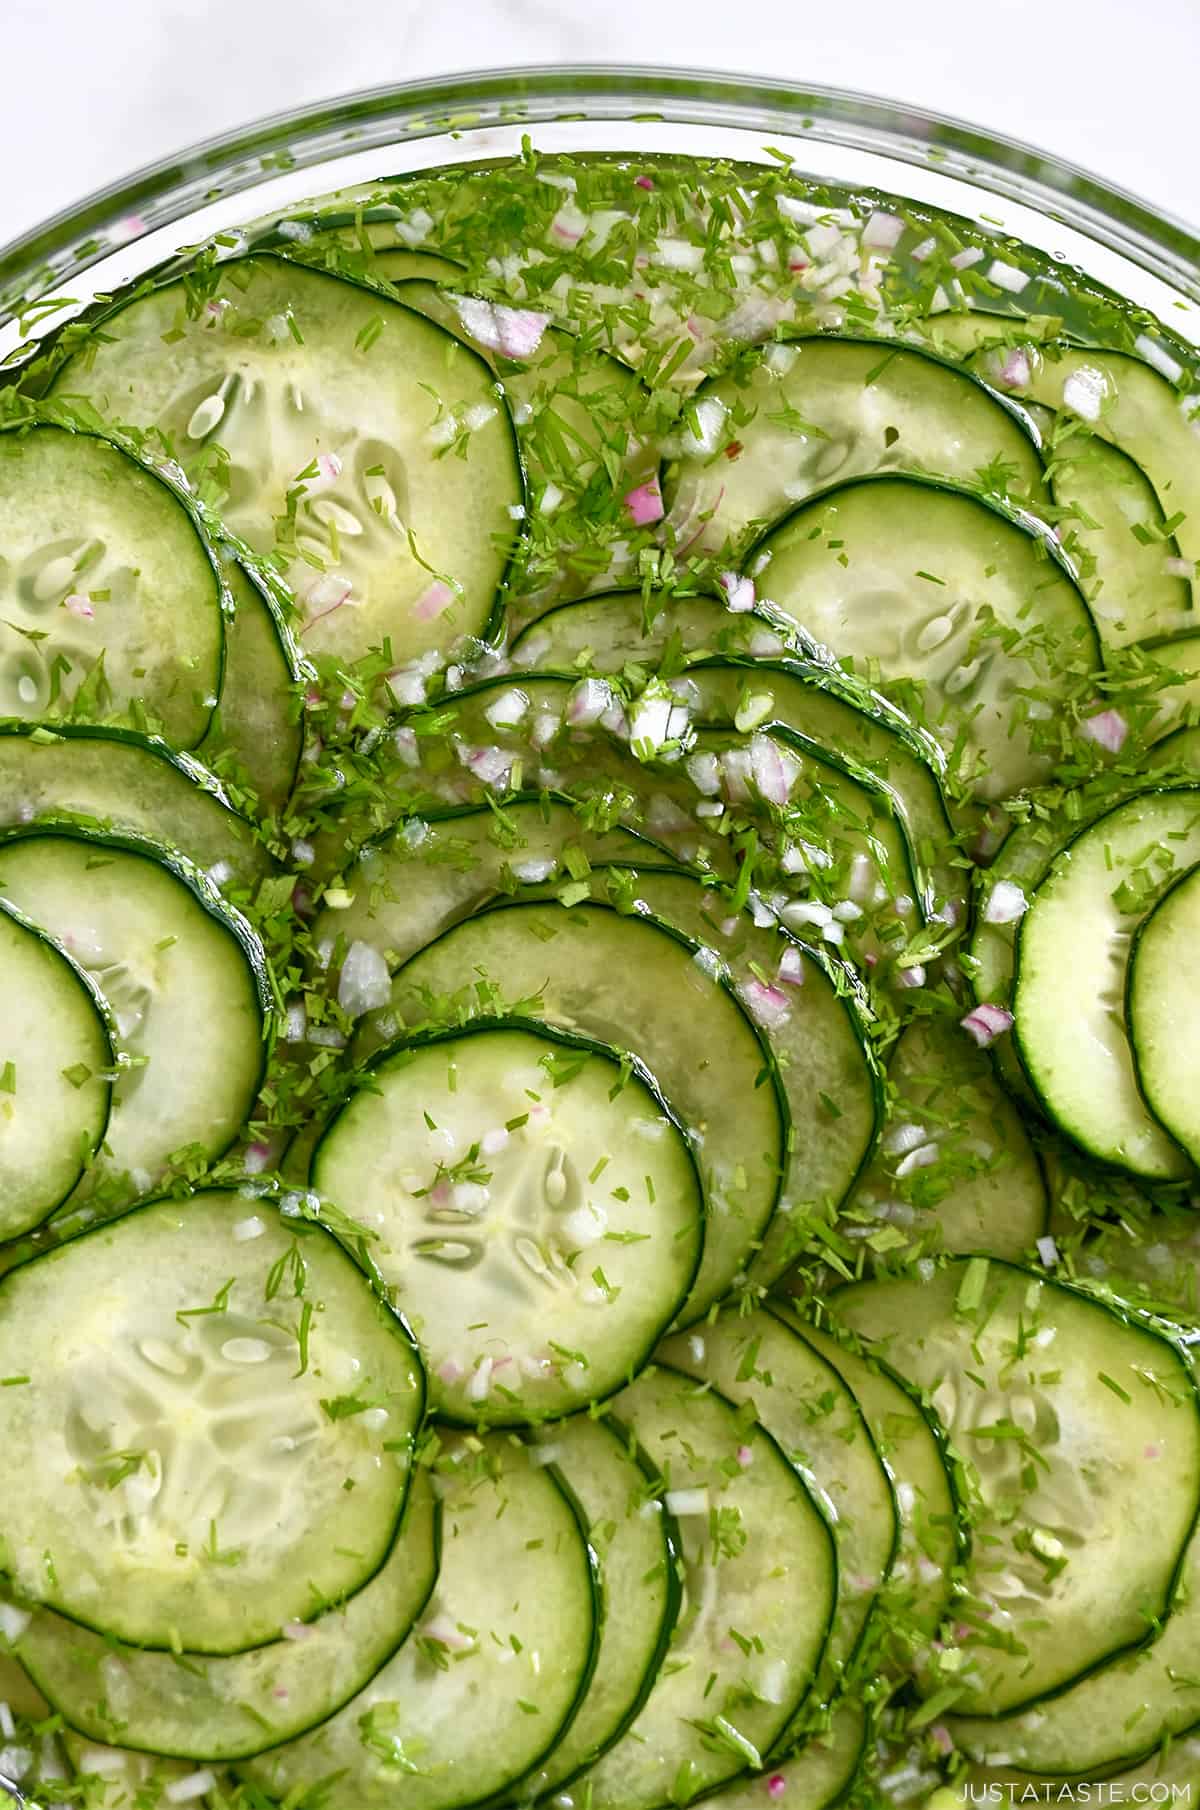 A close-up view of cucumber salad with fresh dill and diced shallots.